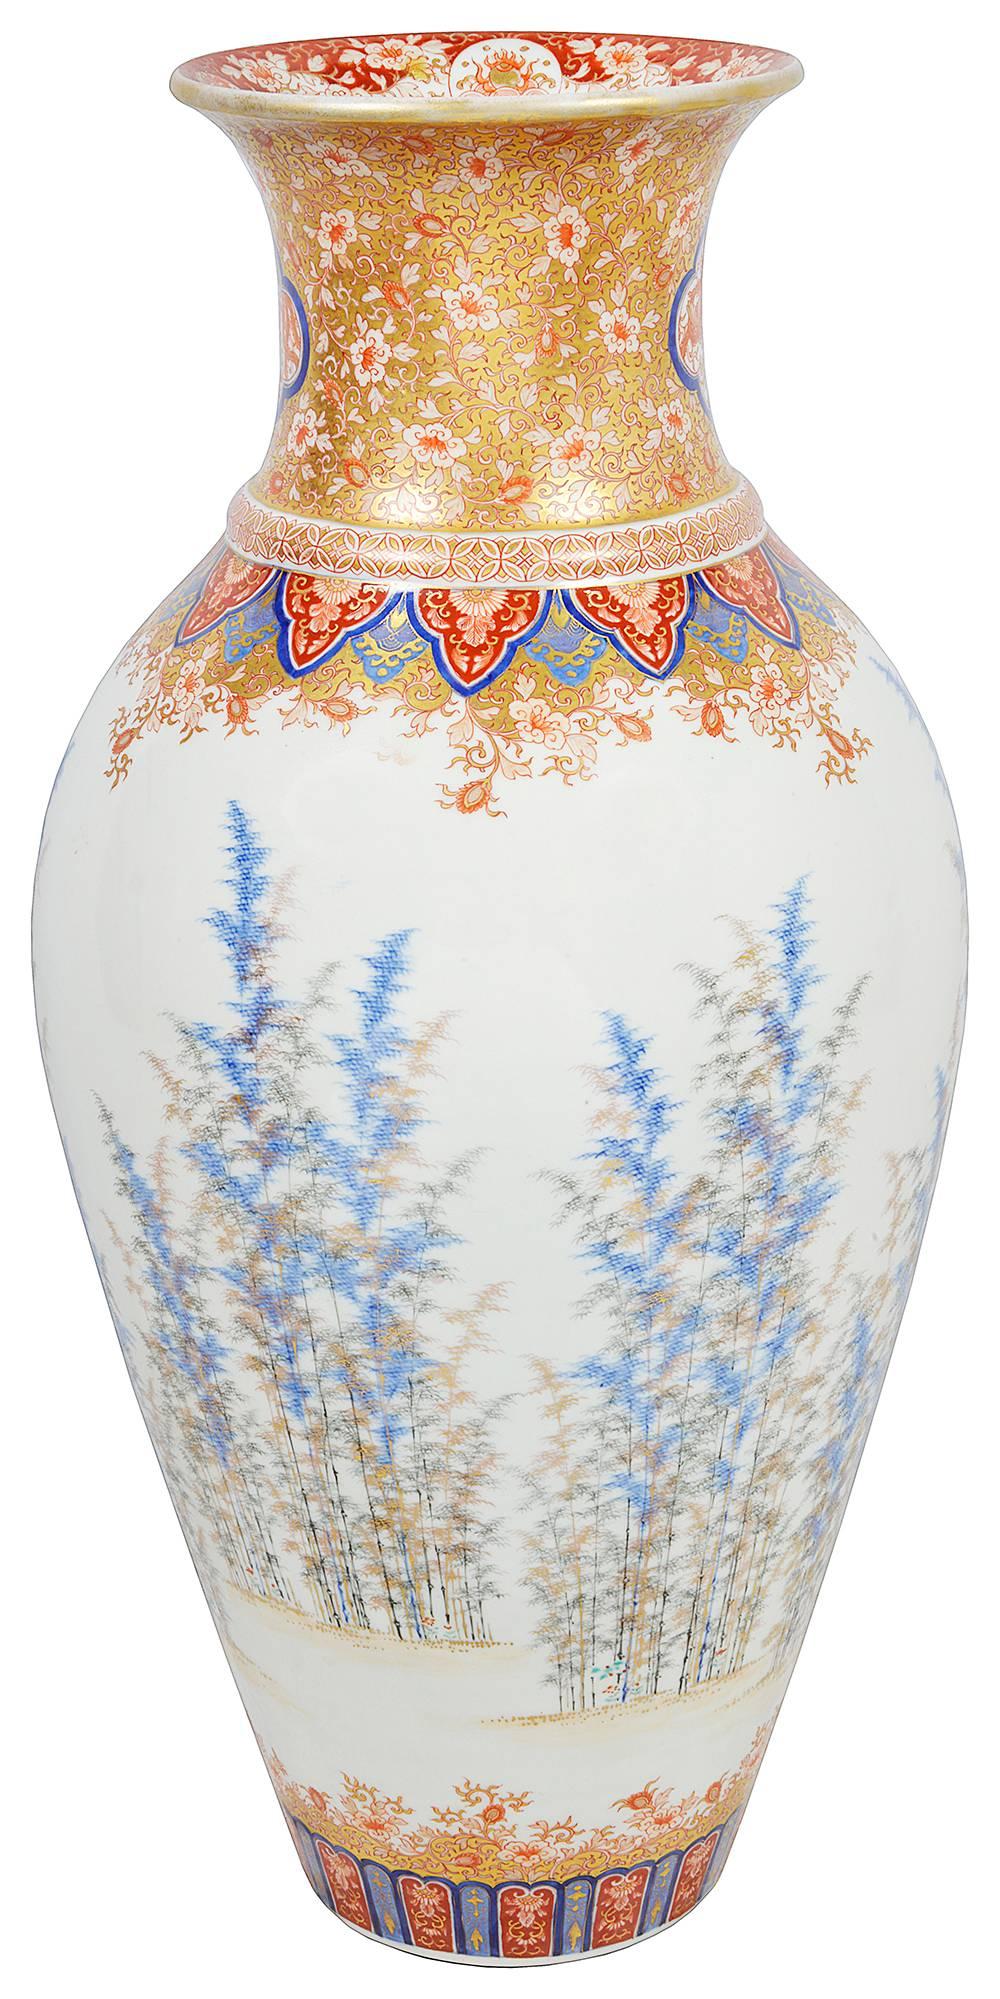 A fine quality late 19th century Japanese Fukagawa porcelain vase. Having wonderful bamboo decoration to the centre with classical motif and scrolling boarders to the top and bottom.
Signed to the base.